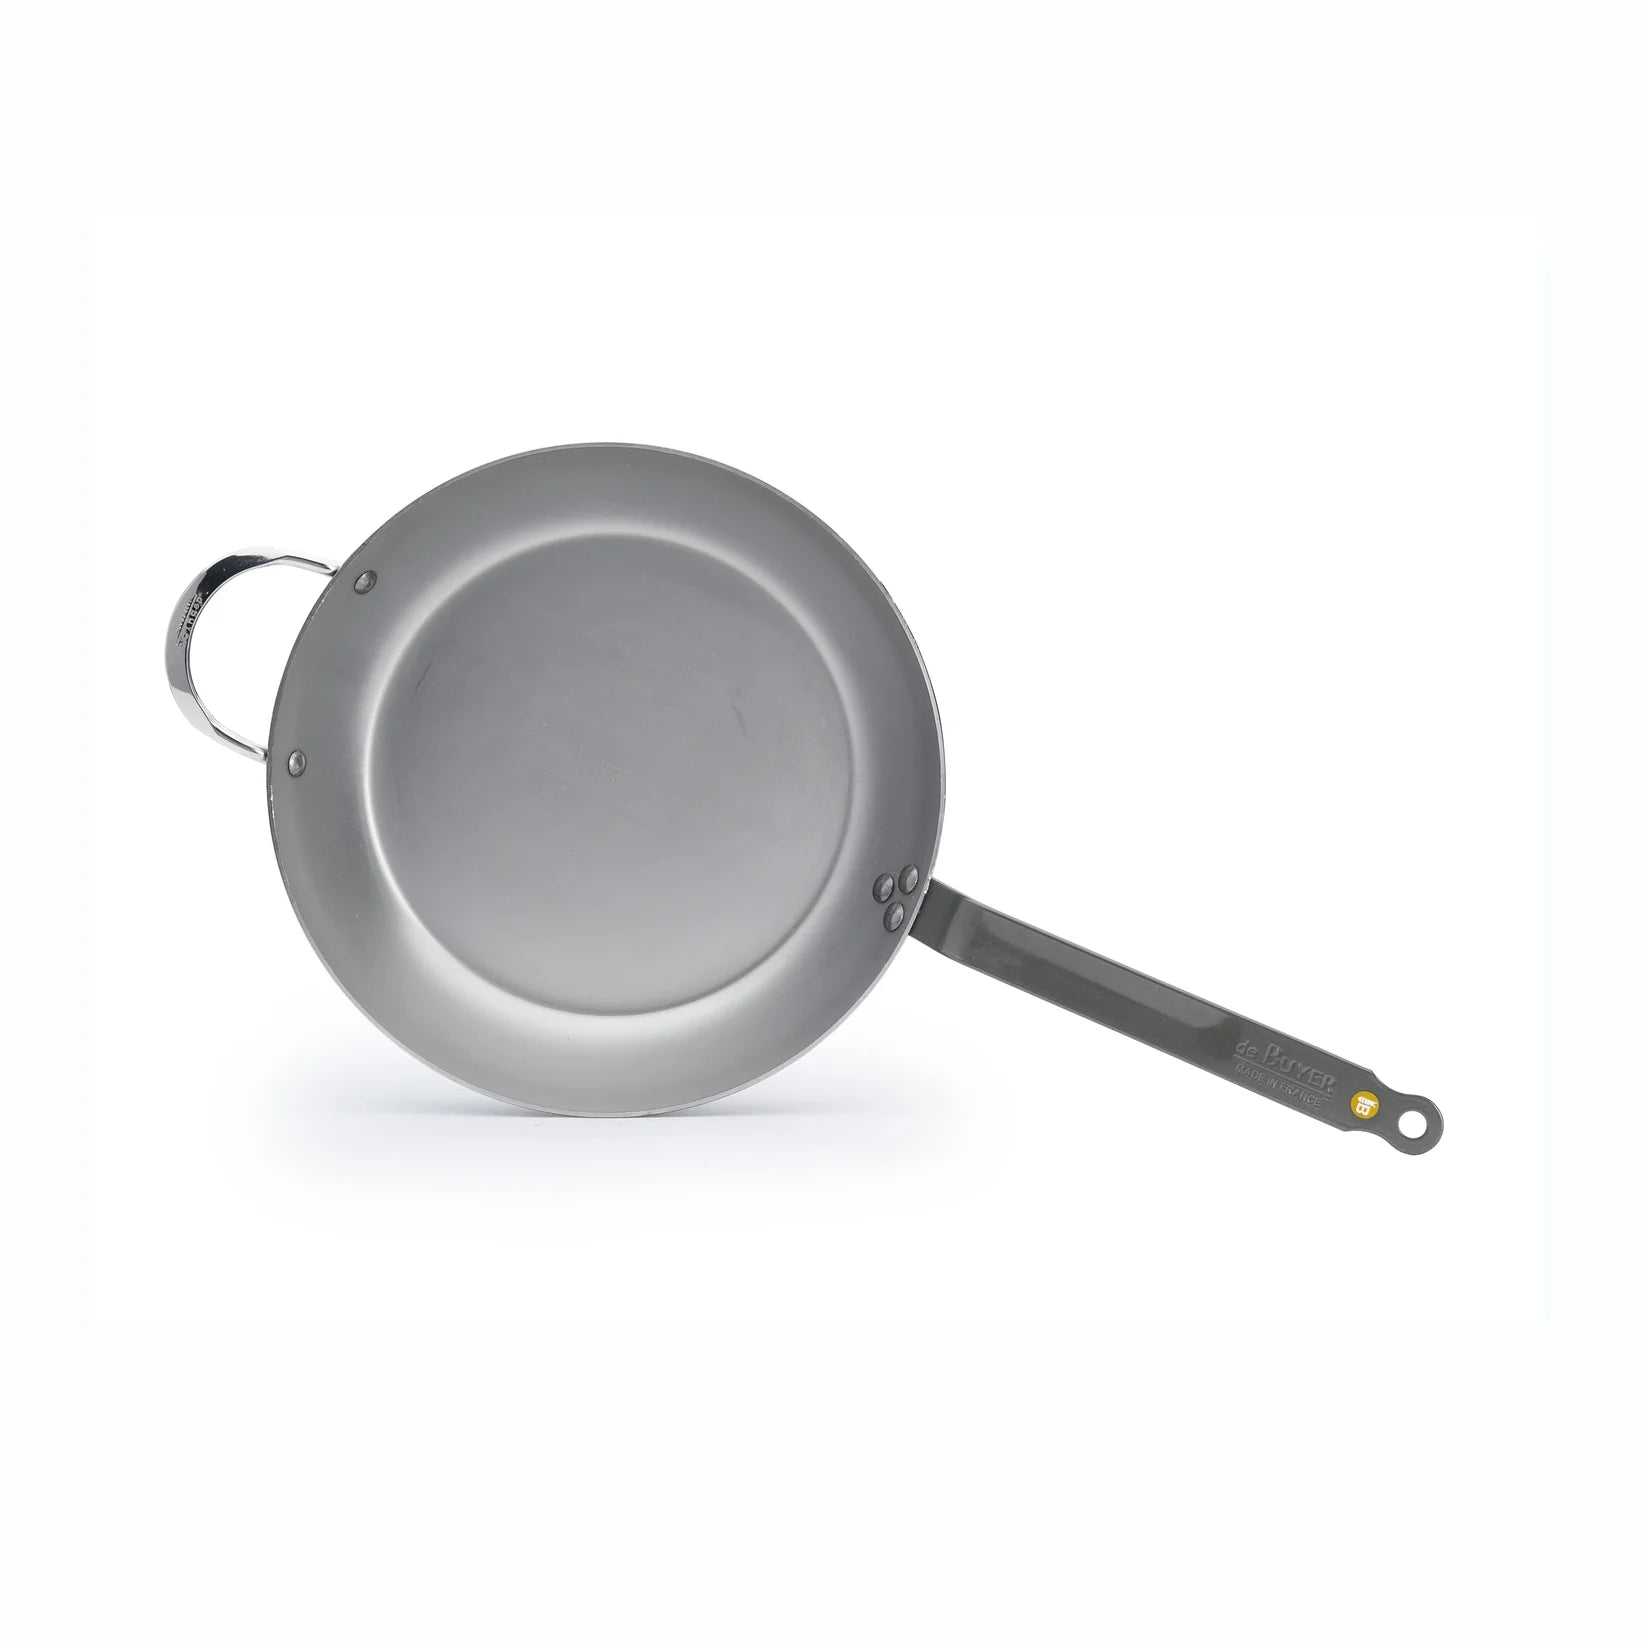 de Buyer MINERAL B Carbon Steel Omelette Pan - 11” - Naturally Nonstick -  Made in France